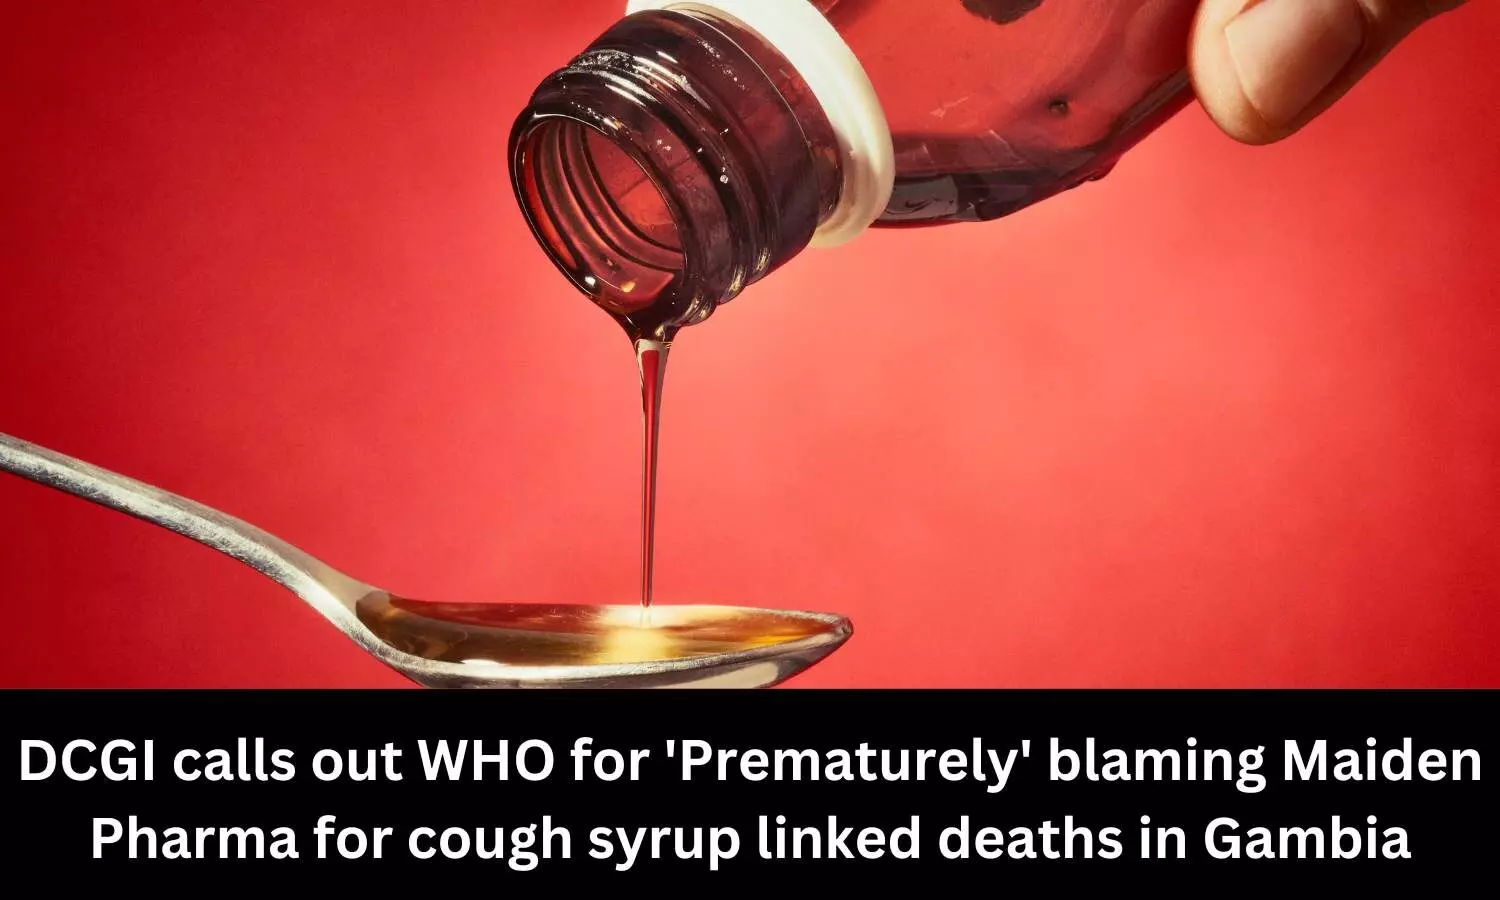 DCGI says WHO drew premature link between children deaths in Gambia, Maiden Pharma Cough Syrups